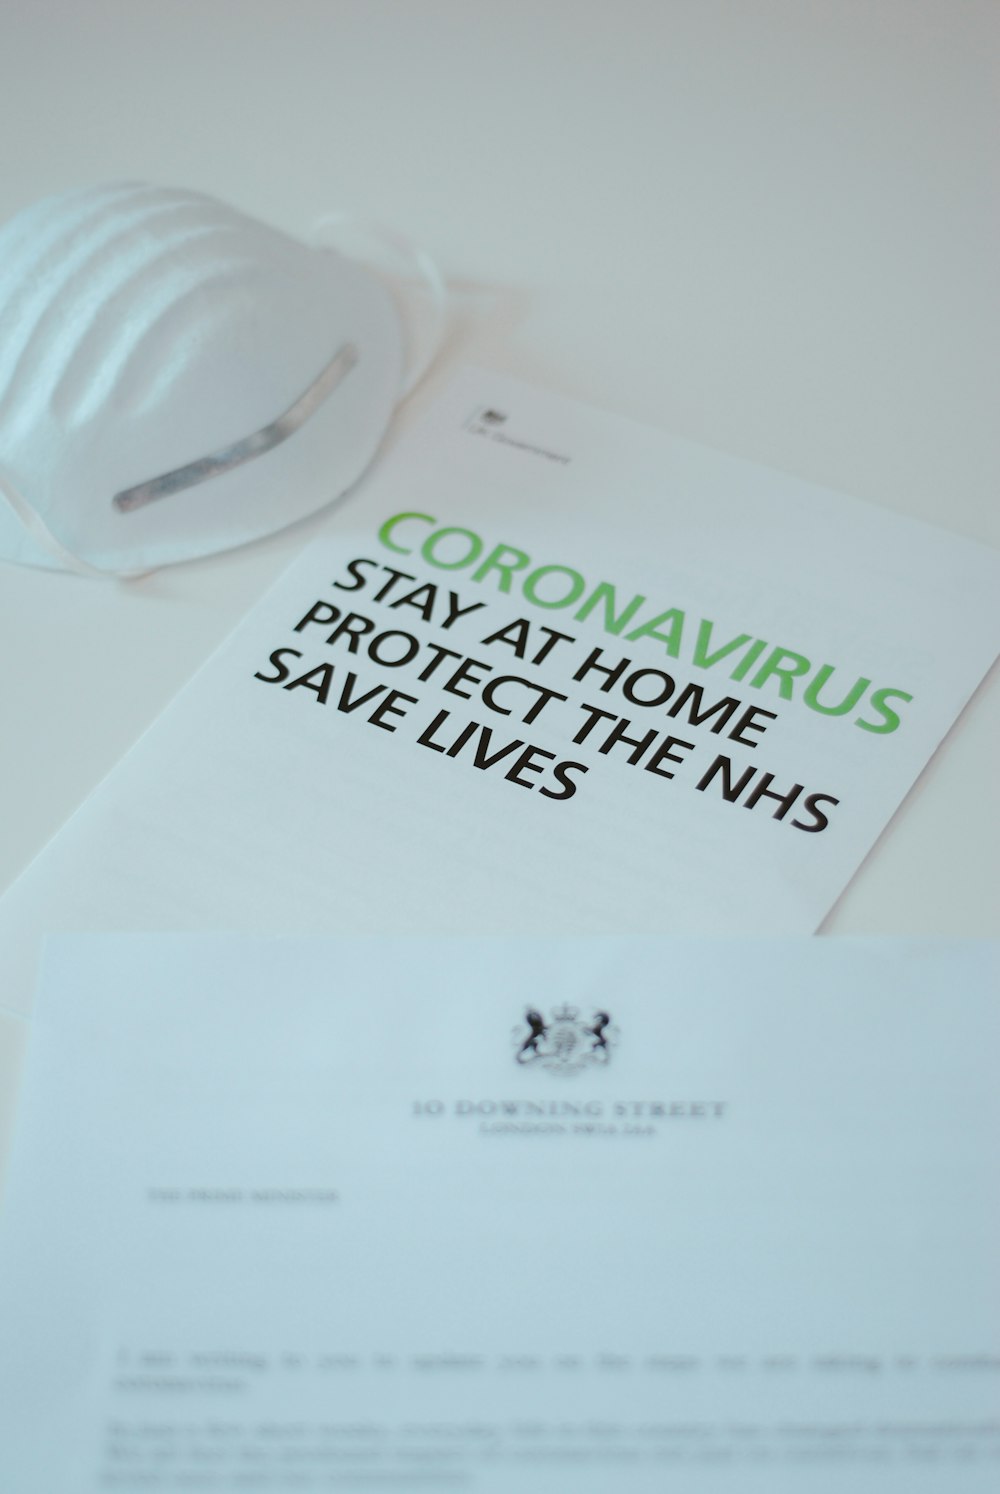 NHS: Stay at home to protect lives